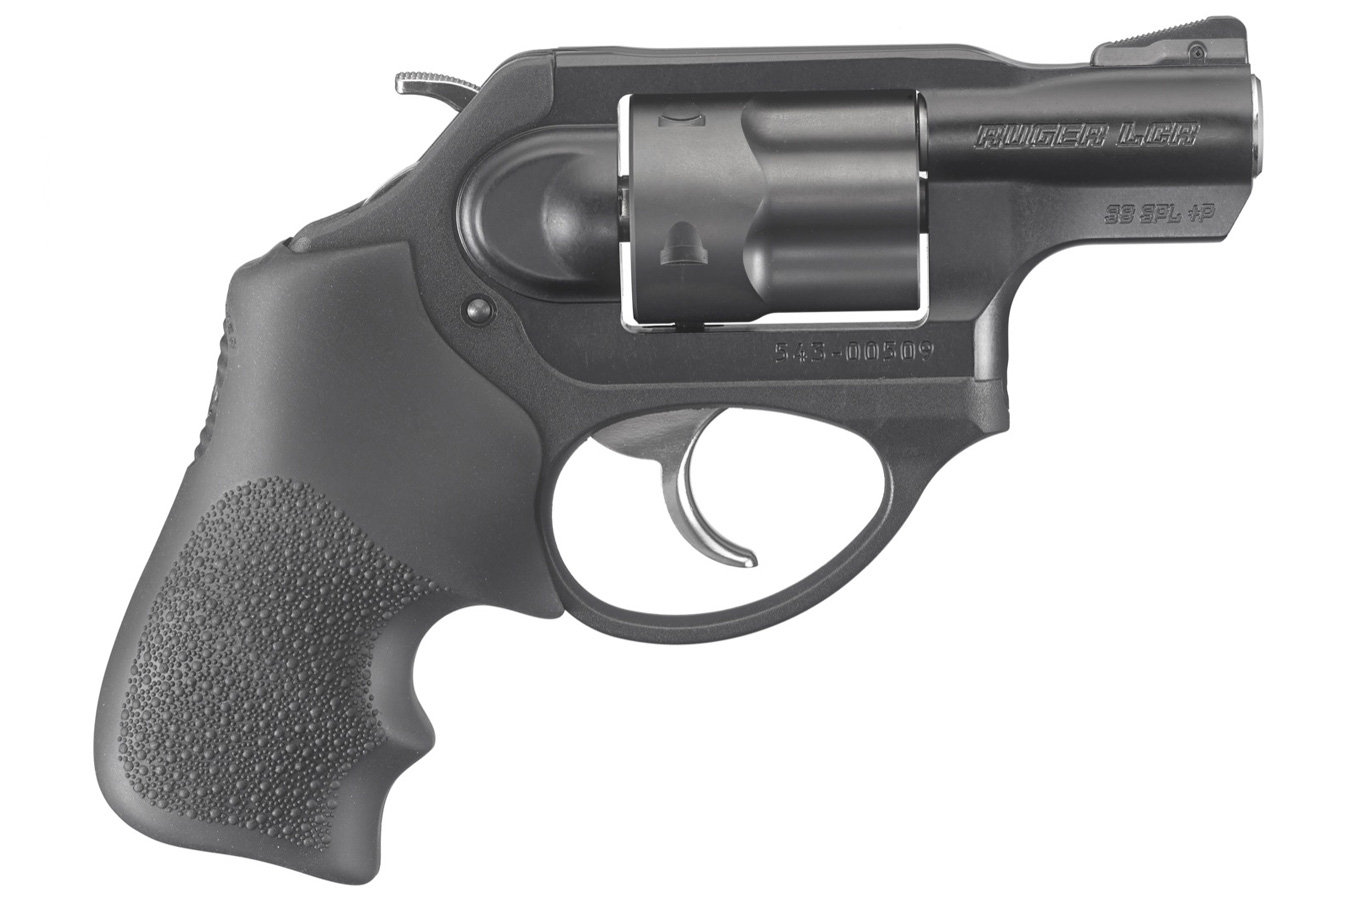 No. 8 Best Selling: RUGER LCR-X 38SPL DOUBLE ACTION REVOLVER